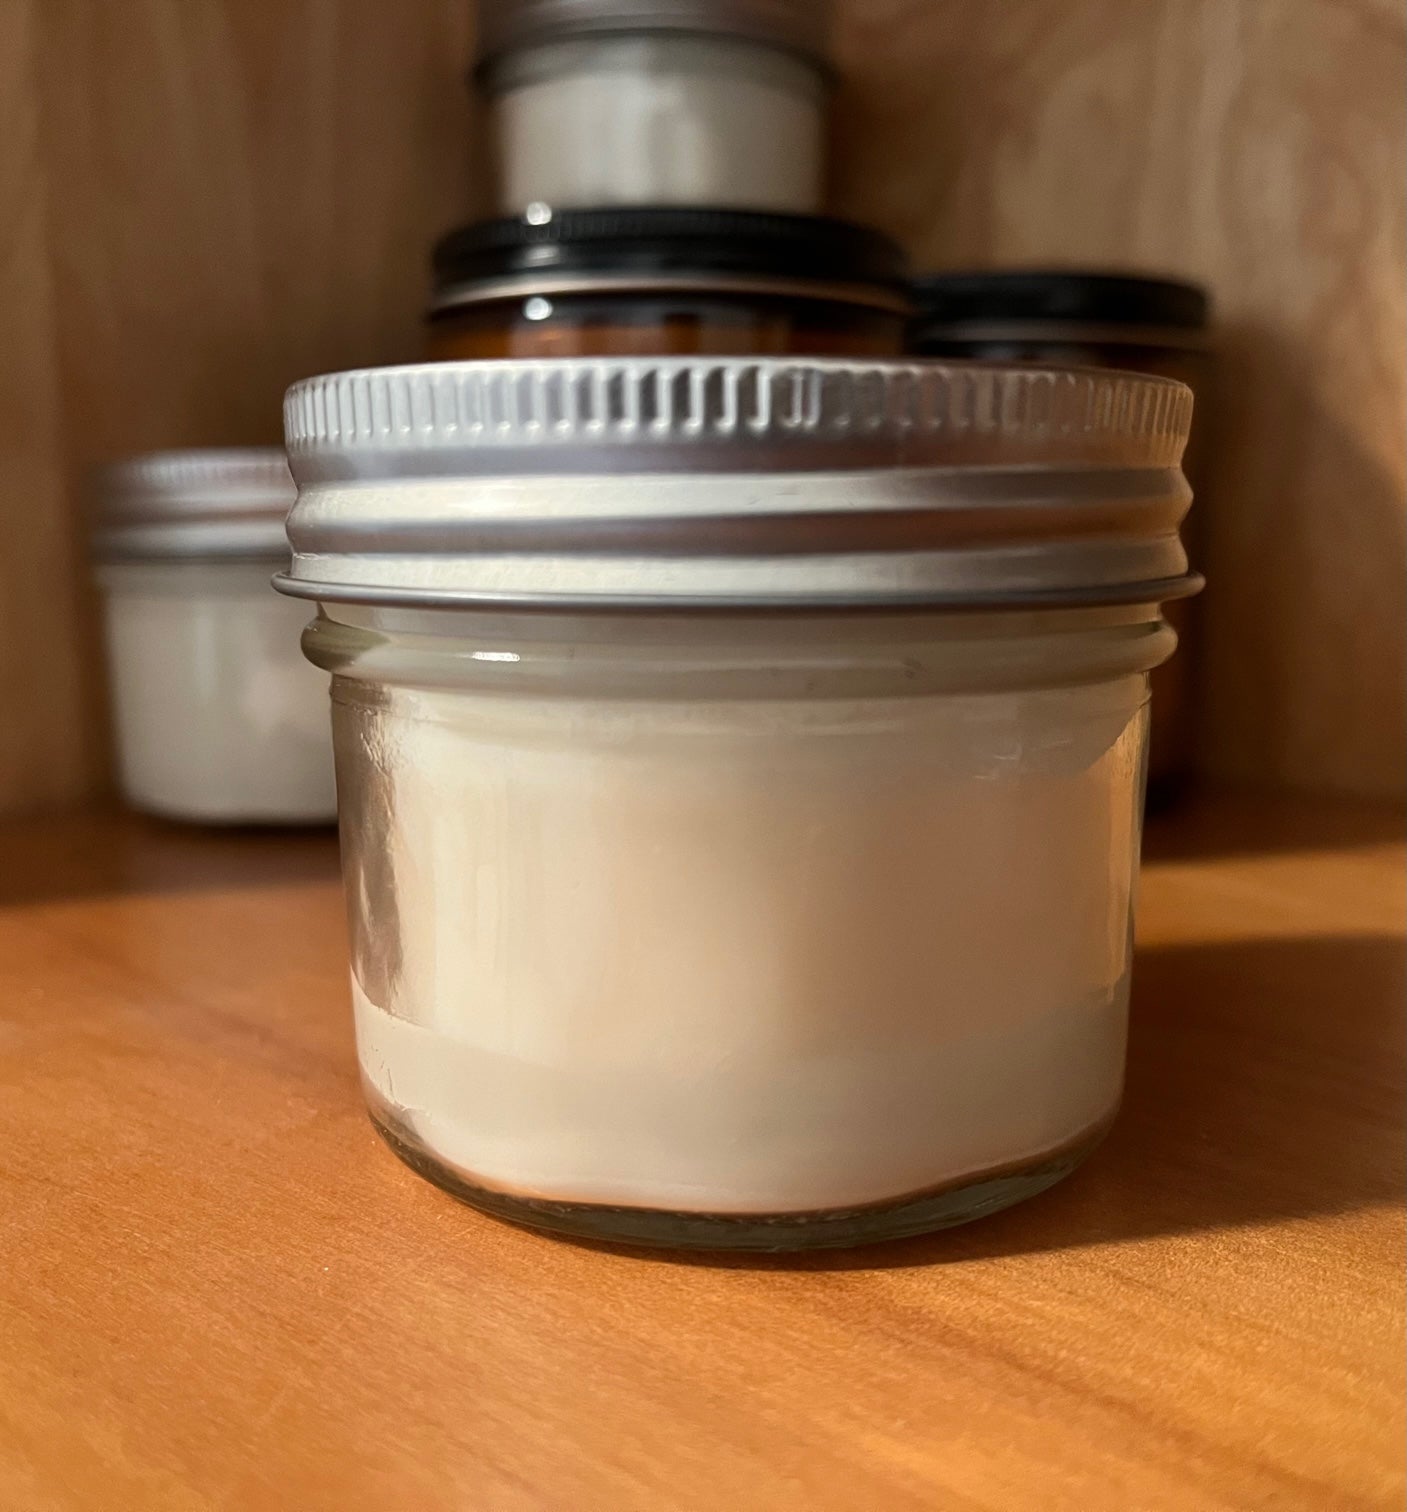 Spring Flowers - Soy Candle